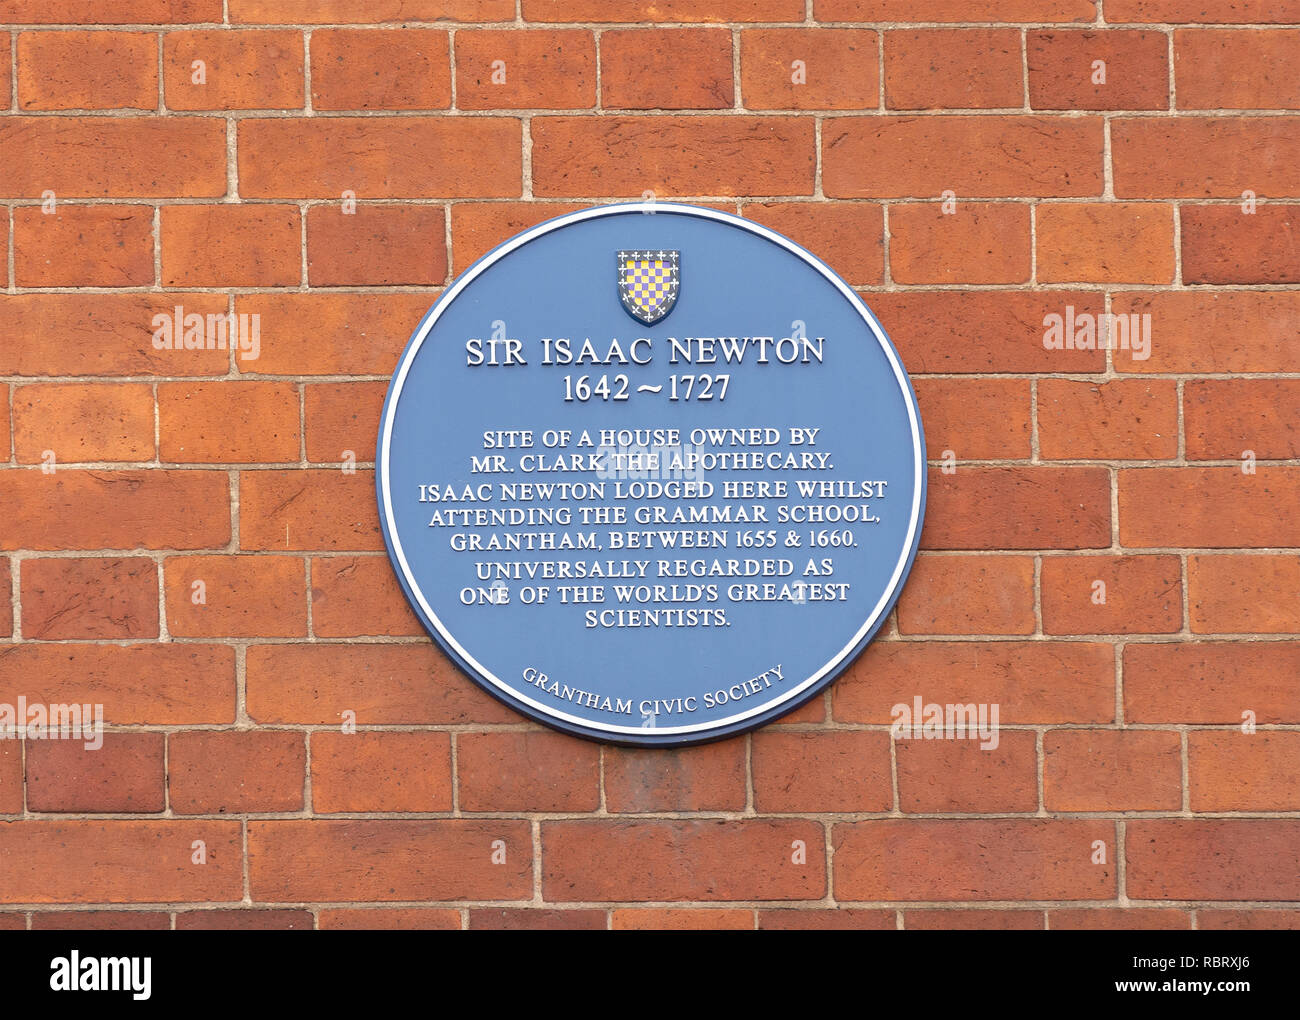 Blue plaque to Sir Isaac Newton, The George Shopping Centre, High Street, Grantham, Lincolnshire, England, United Kingdom Stock Photo